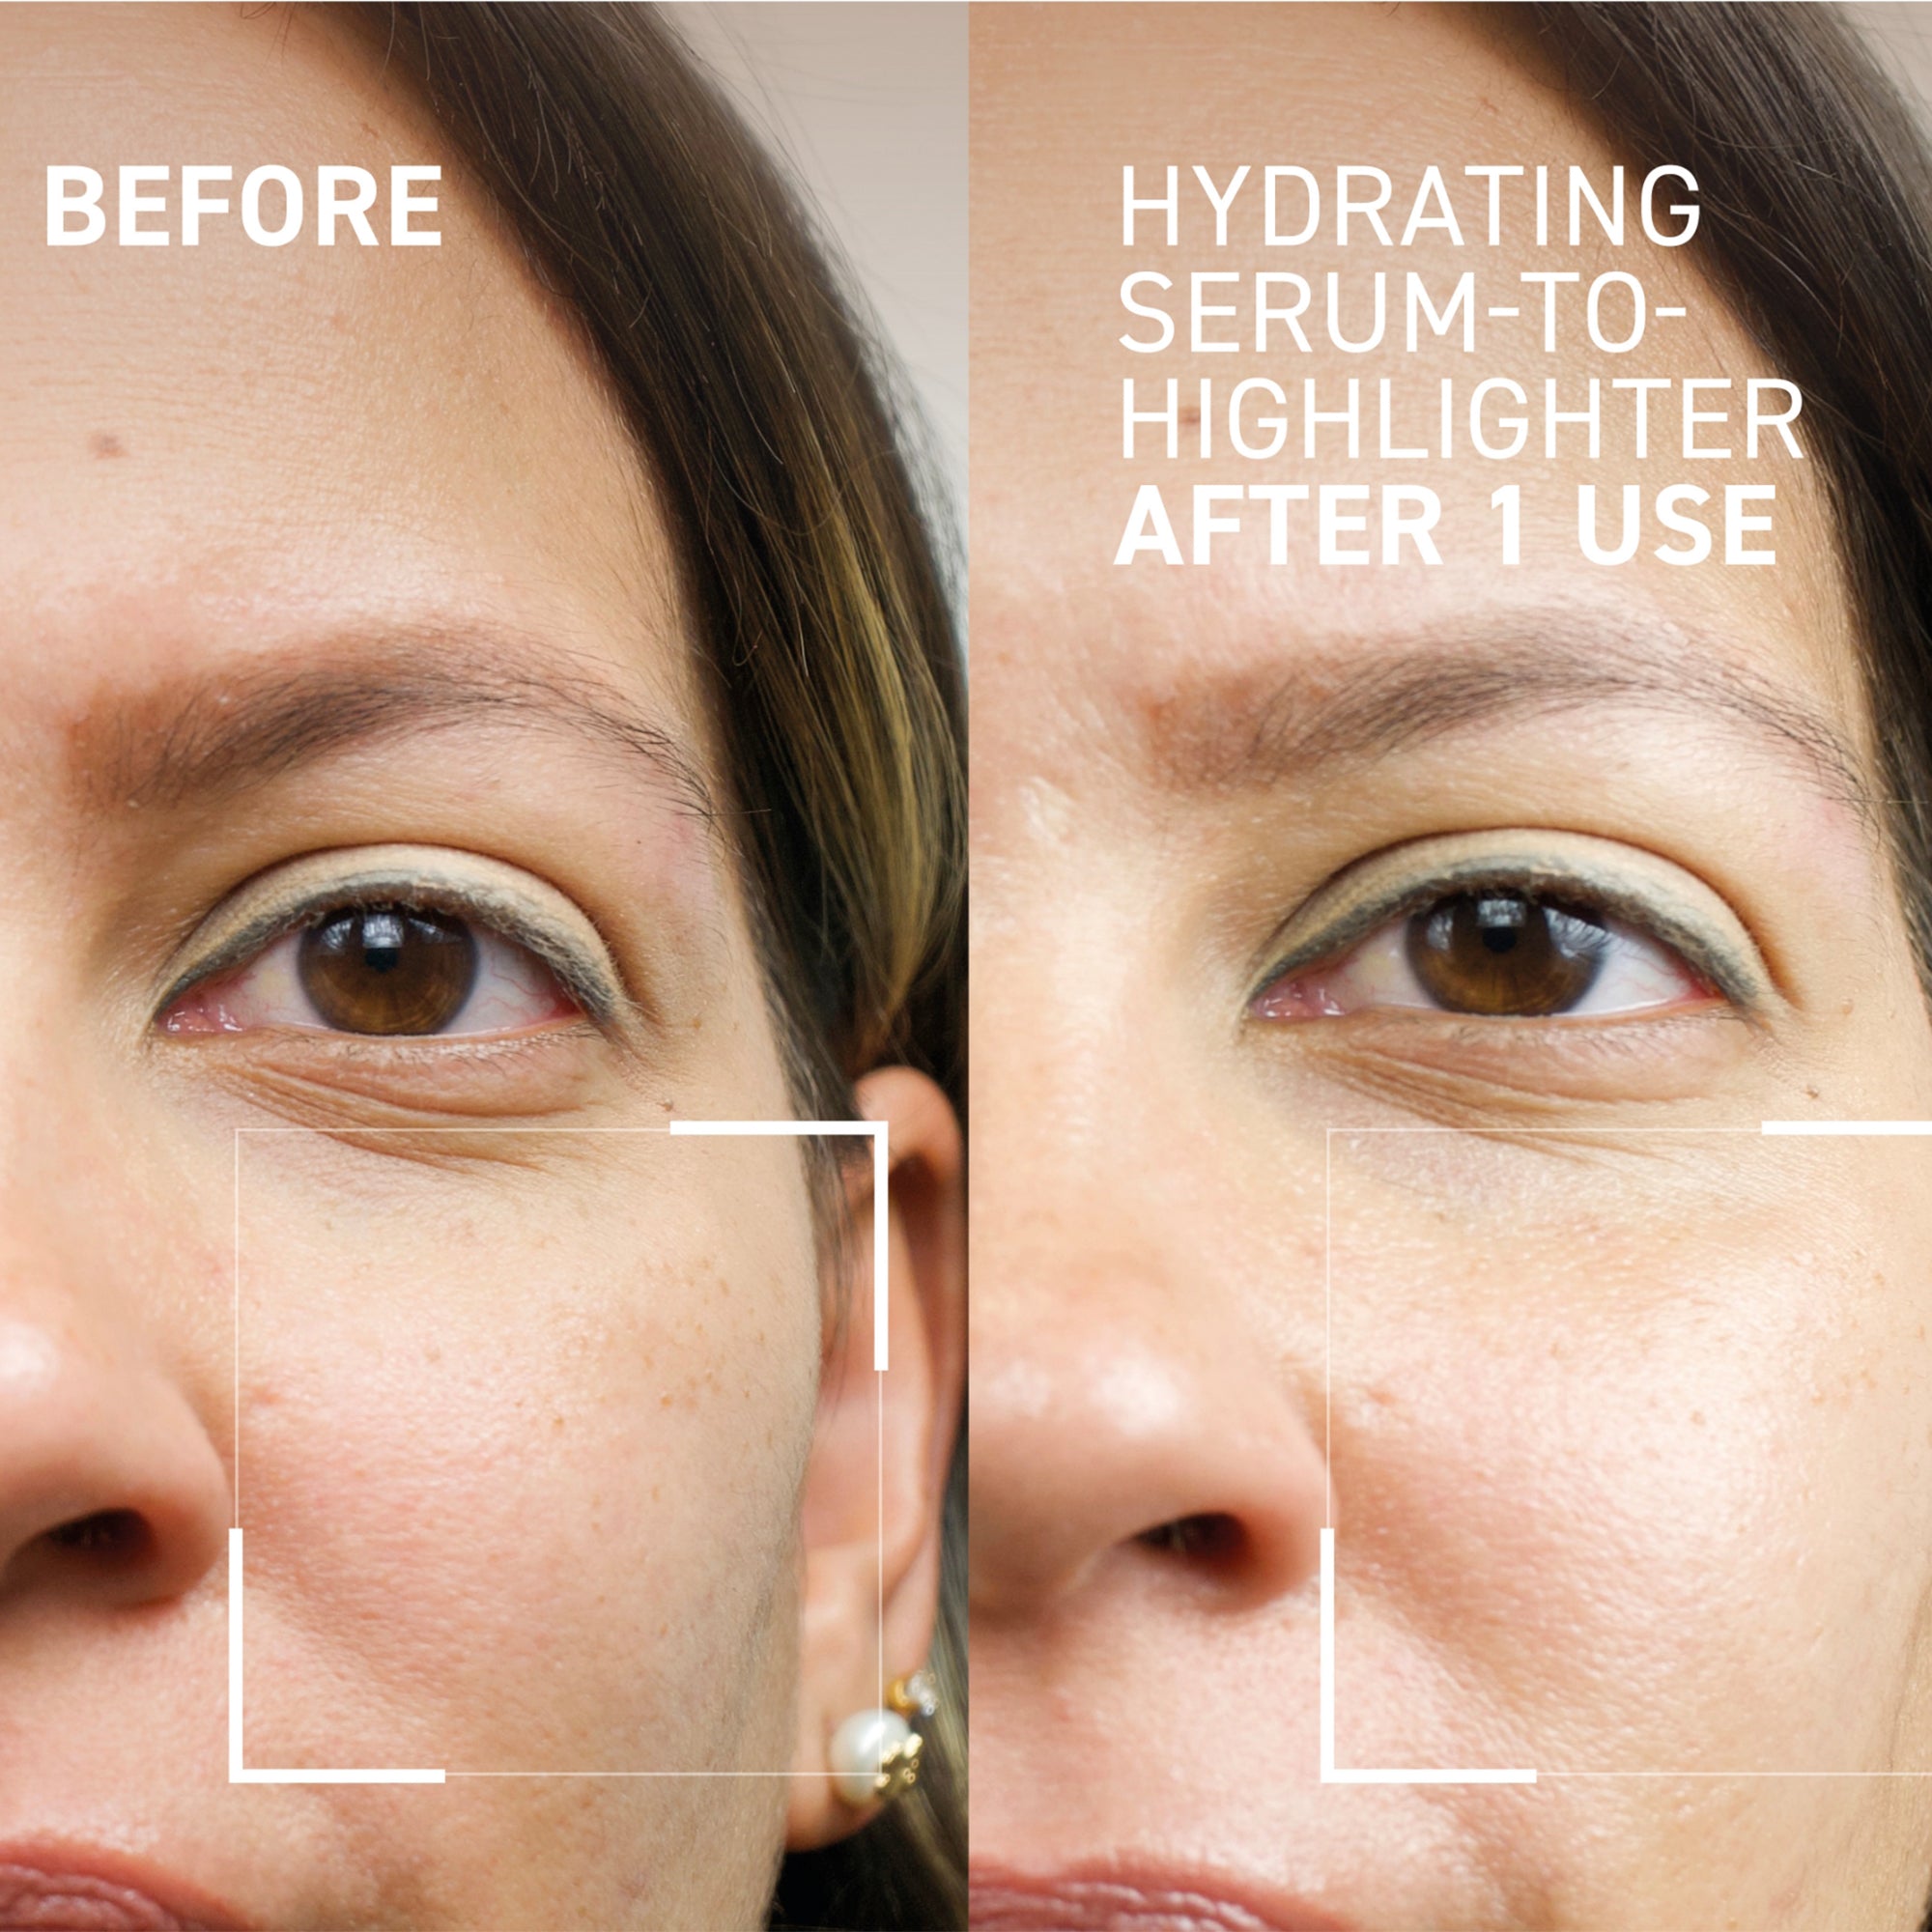 Dr. Brandt -Hydrating Serum-to-Highlighter image 4